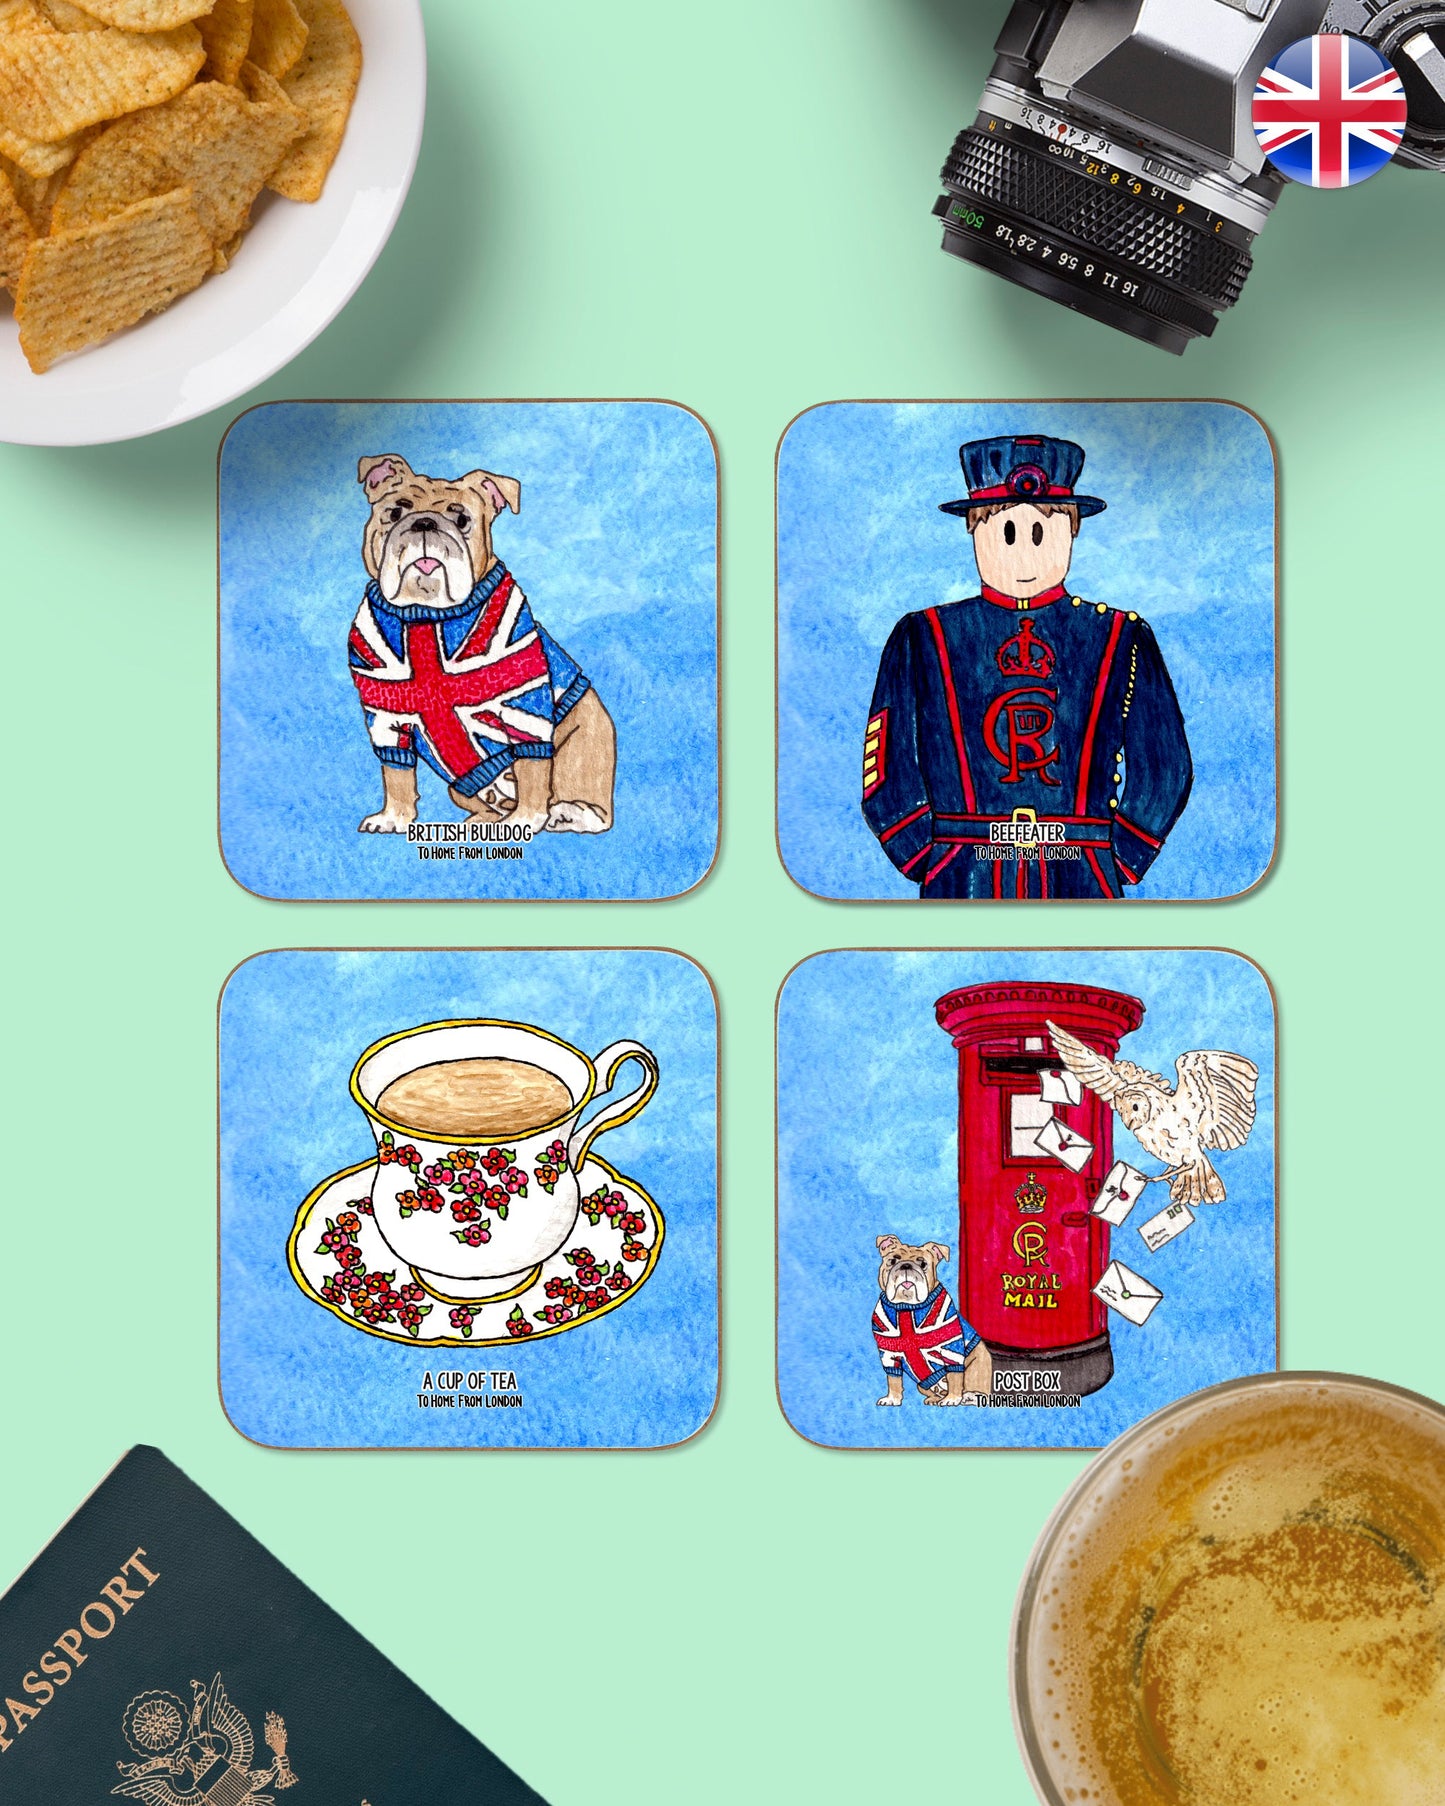 London Icons Coasters - To Home From London